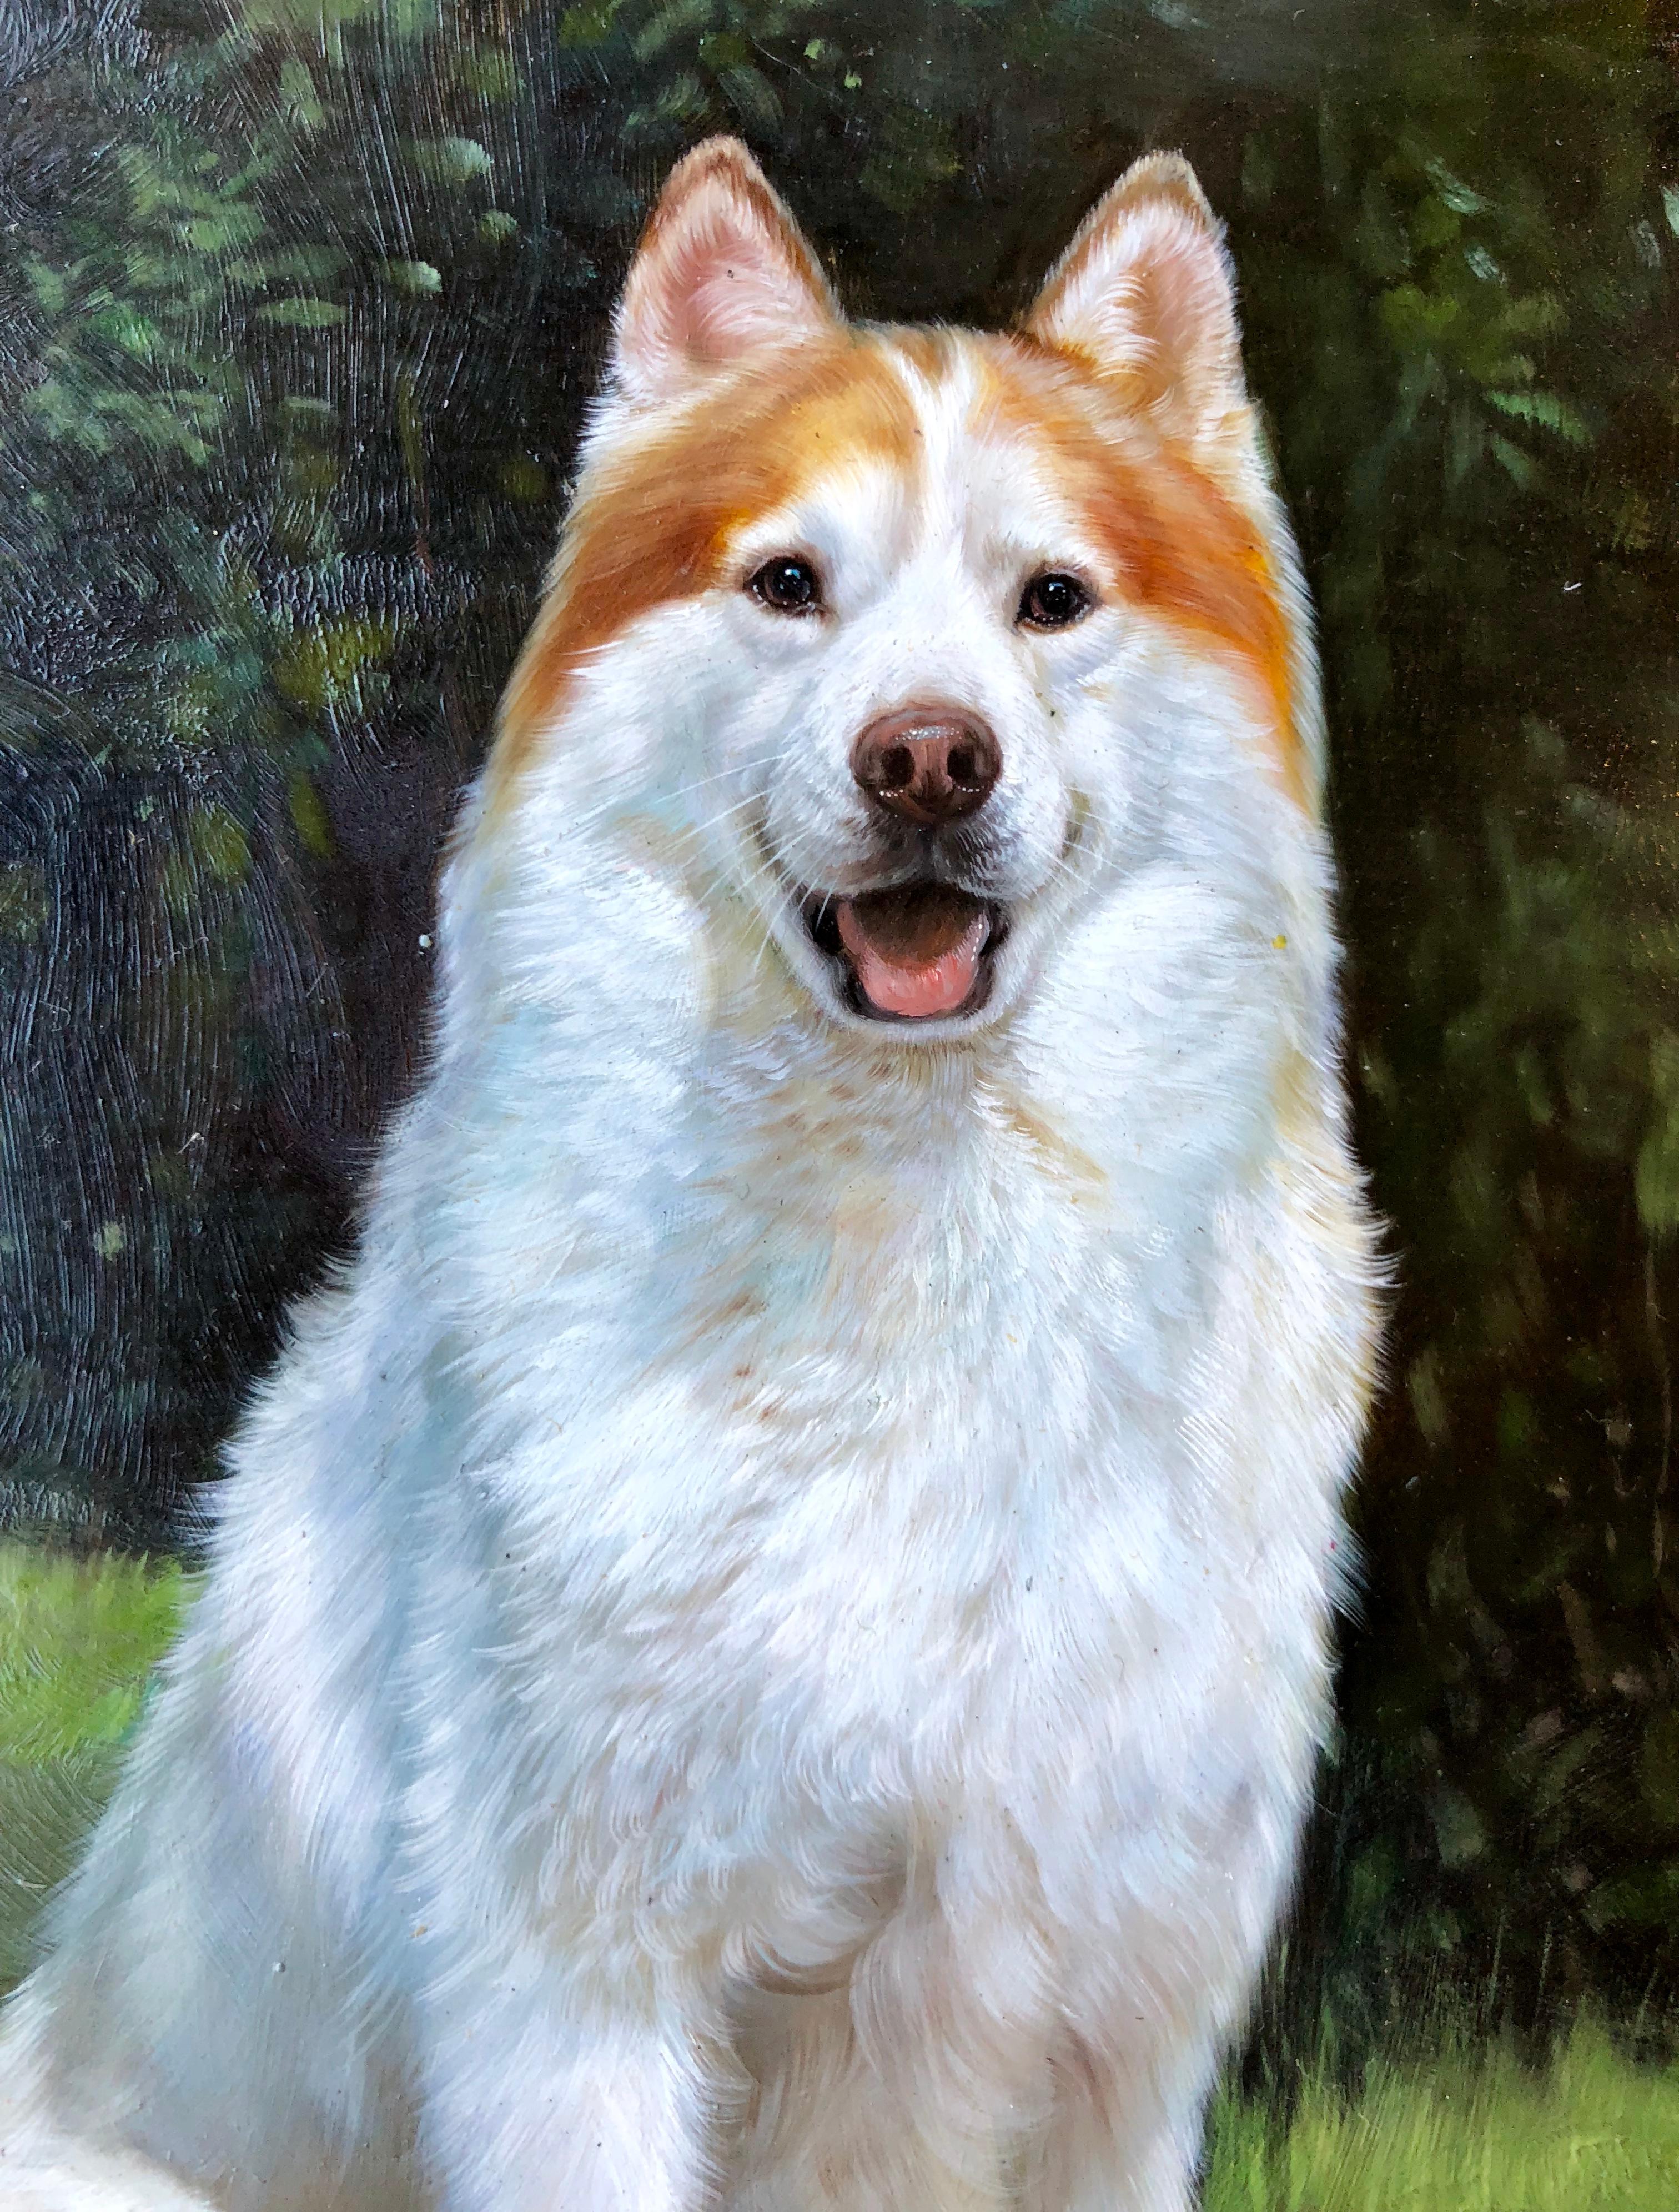 Other Excellent Quality Original Oil Painting of a Husky Dog by French Artist Girard